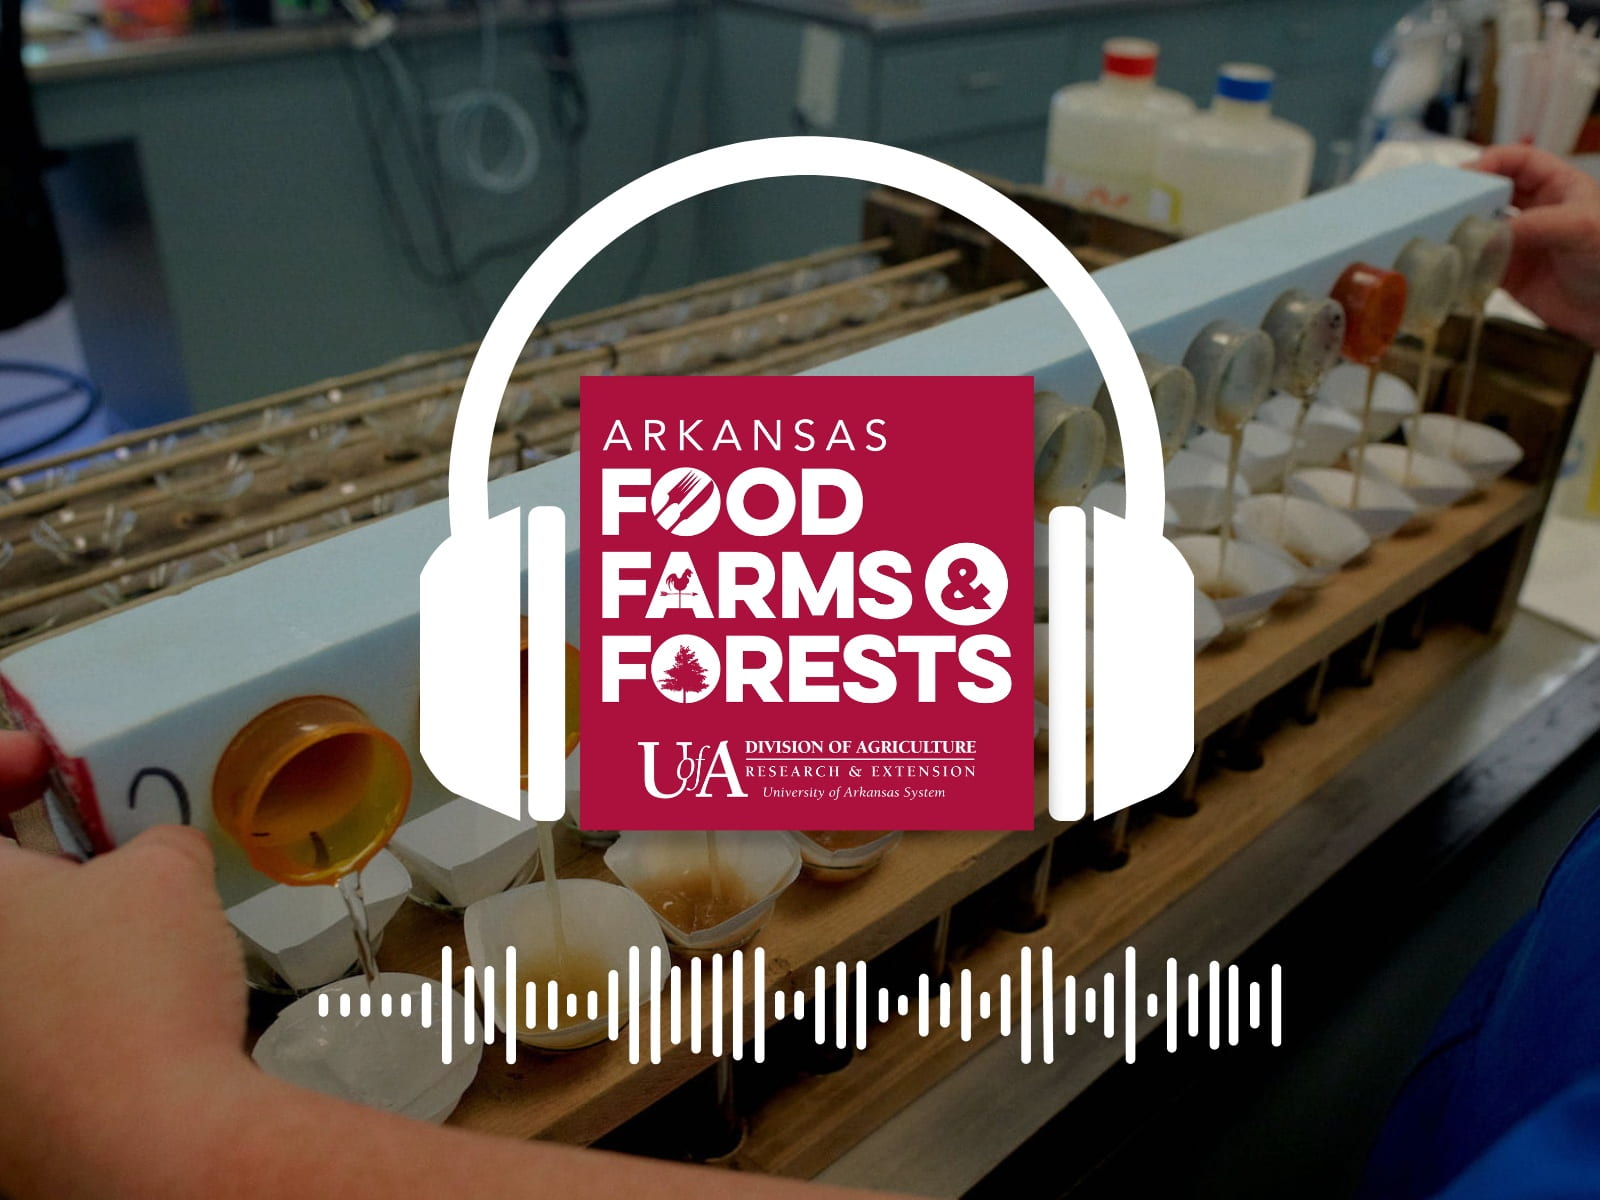 A laboratory scene with a graphic overlay of headphones and sound waves, promoting the "Arkansas Food Farms & Forests" podcast by the Division of Agriculture, Research & Extension of the University of Arkansas System.